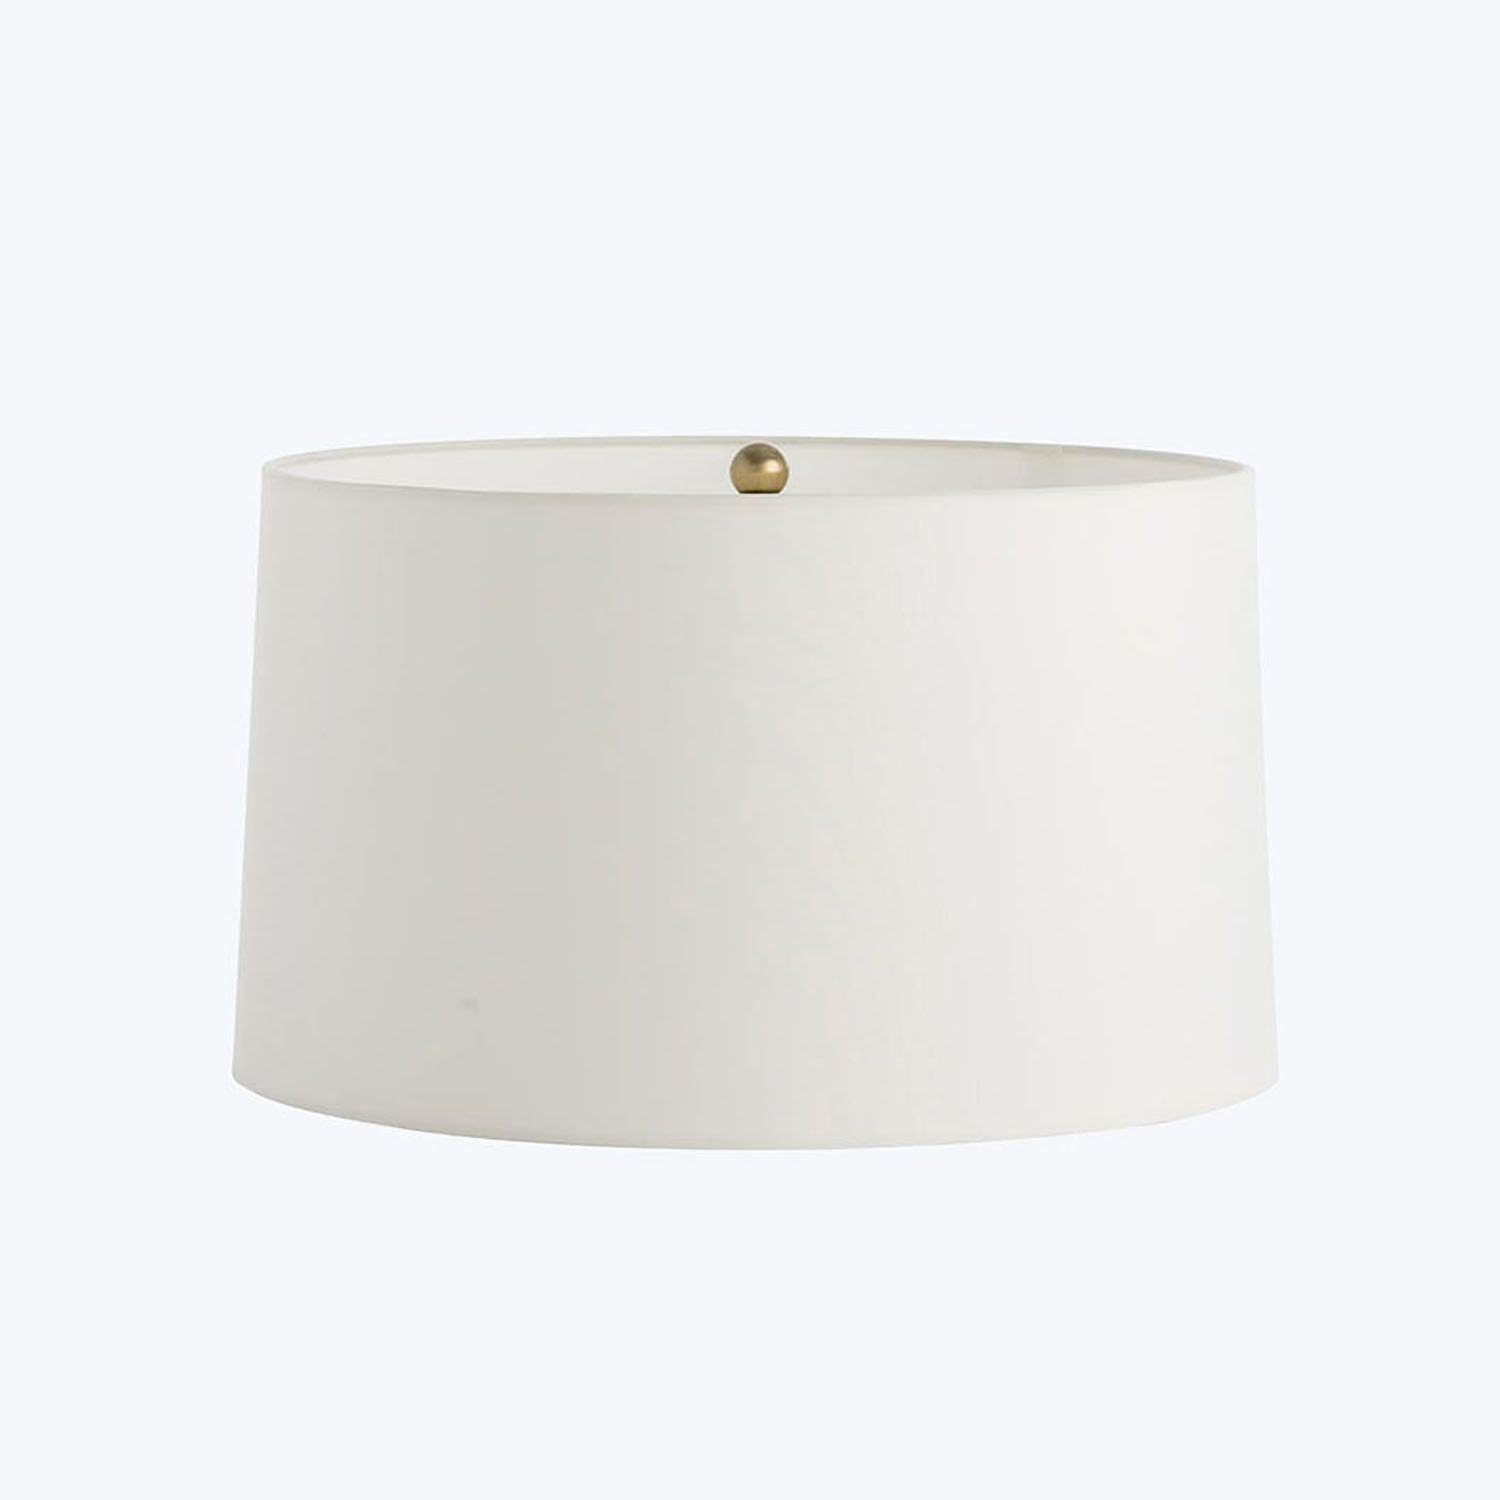 Simple white lampshade with metallic finial against a plain background.